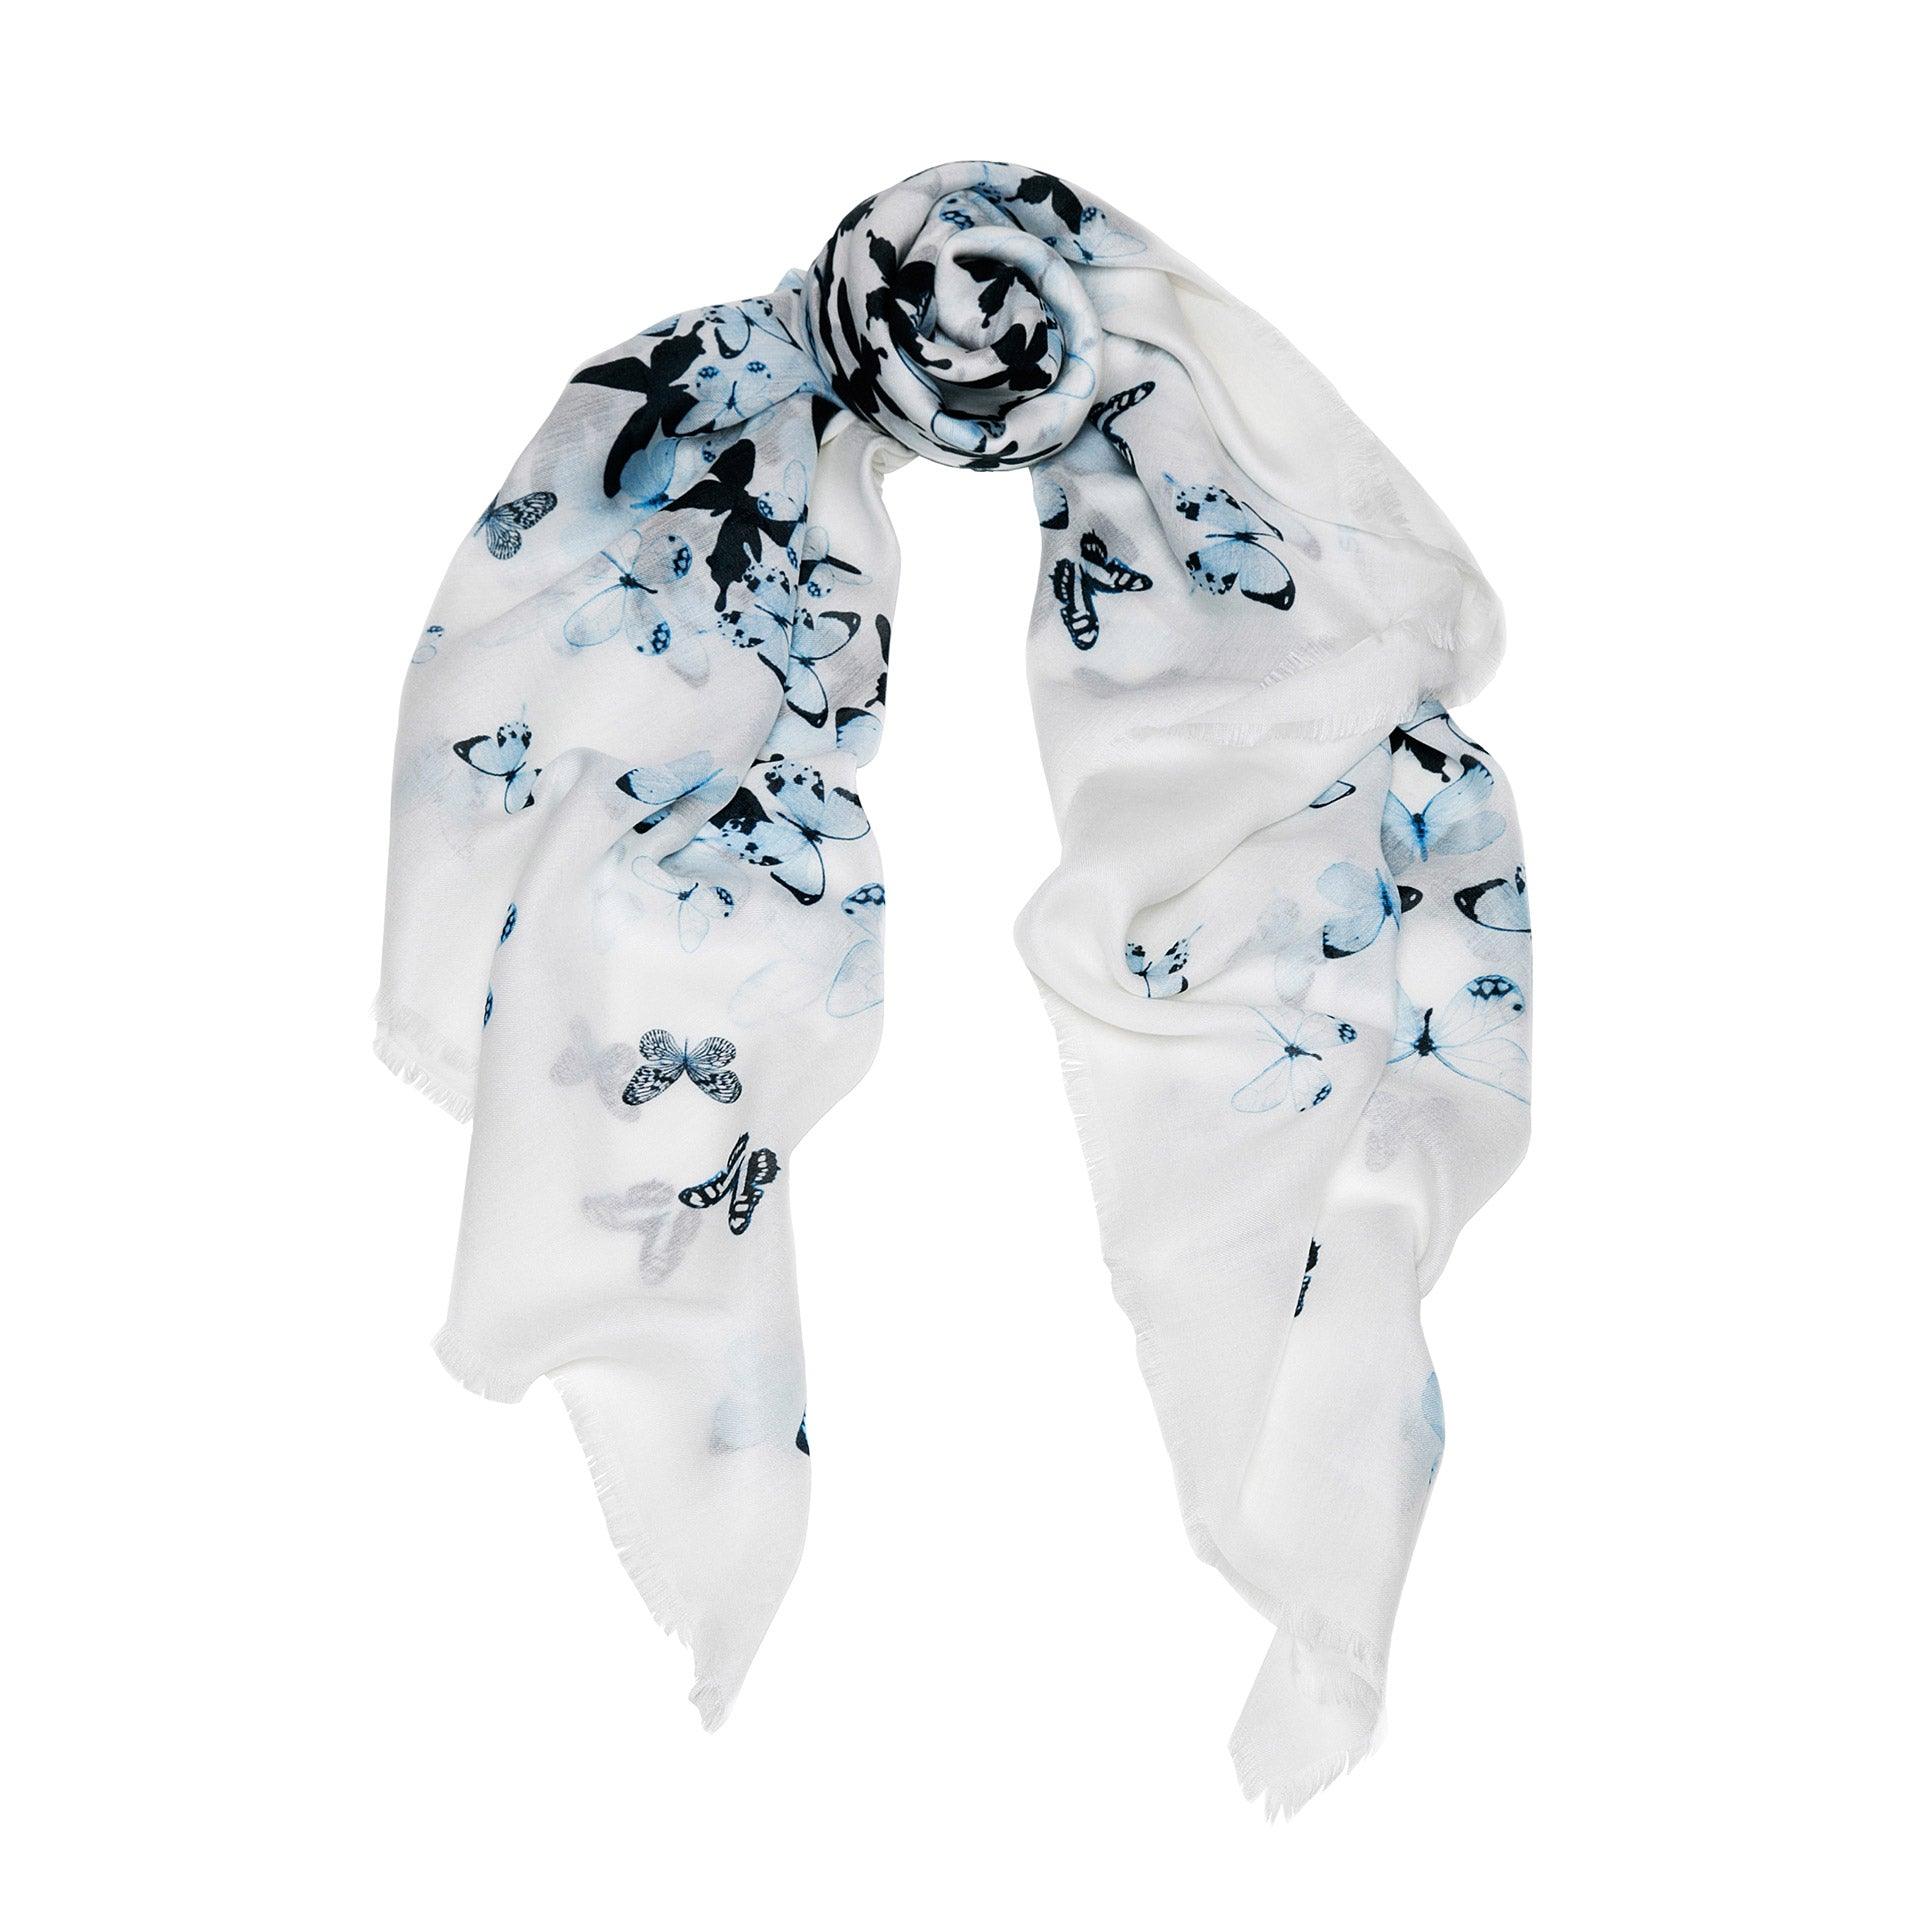 Sky Blue Butterflies Cashmere Blend Scarf - Fusion of London's design and Italian craftsmanship, a luxurious gift choice.